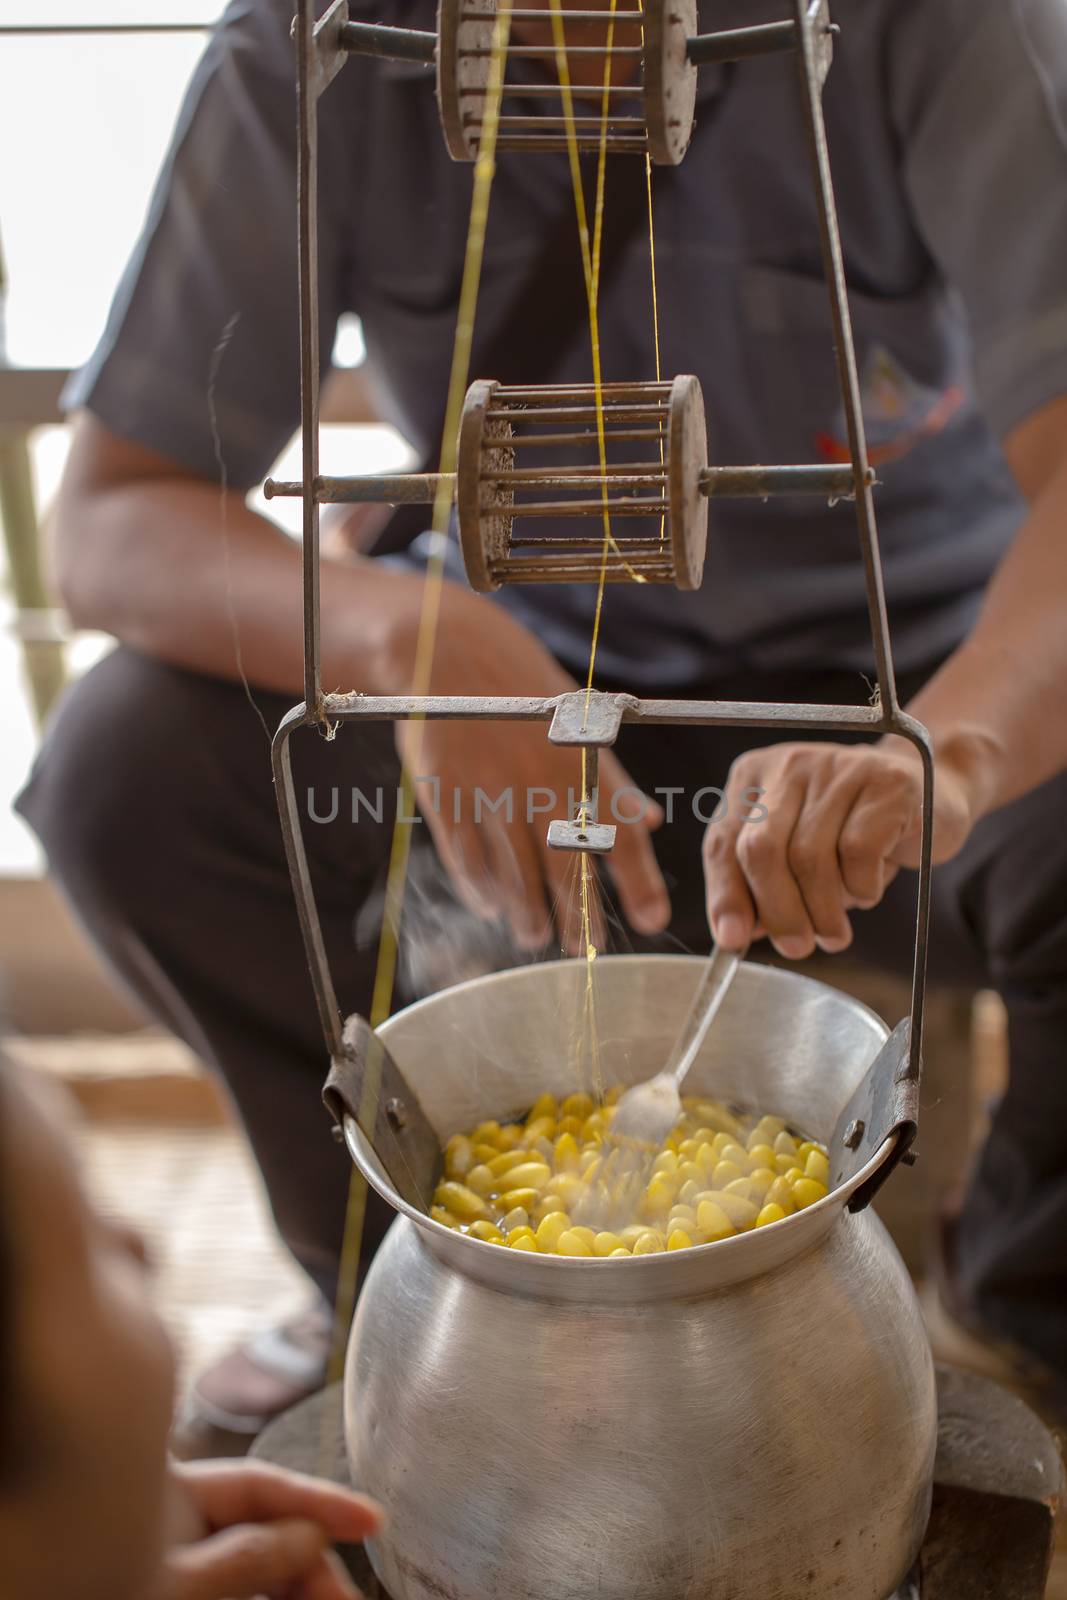 Boiling yellow silkworm cocoons by boiler to make silk thread by kaiskynet